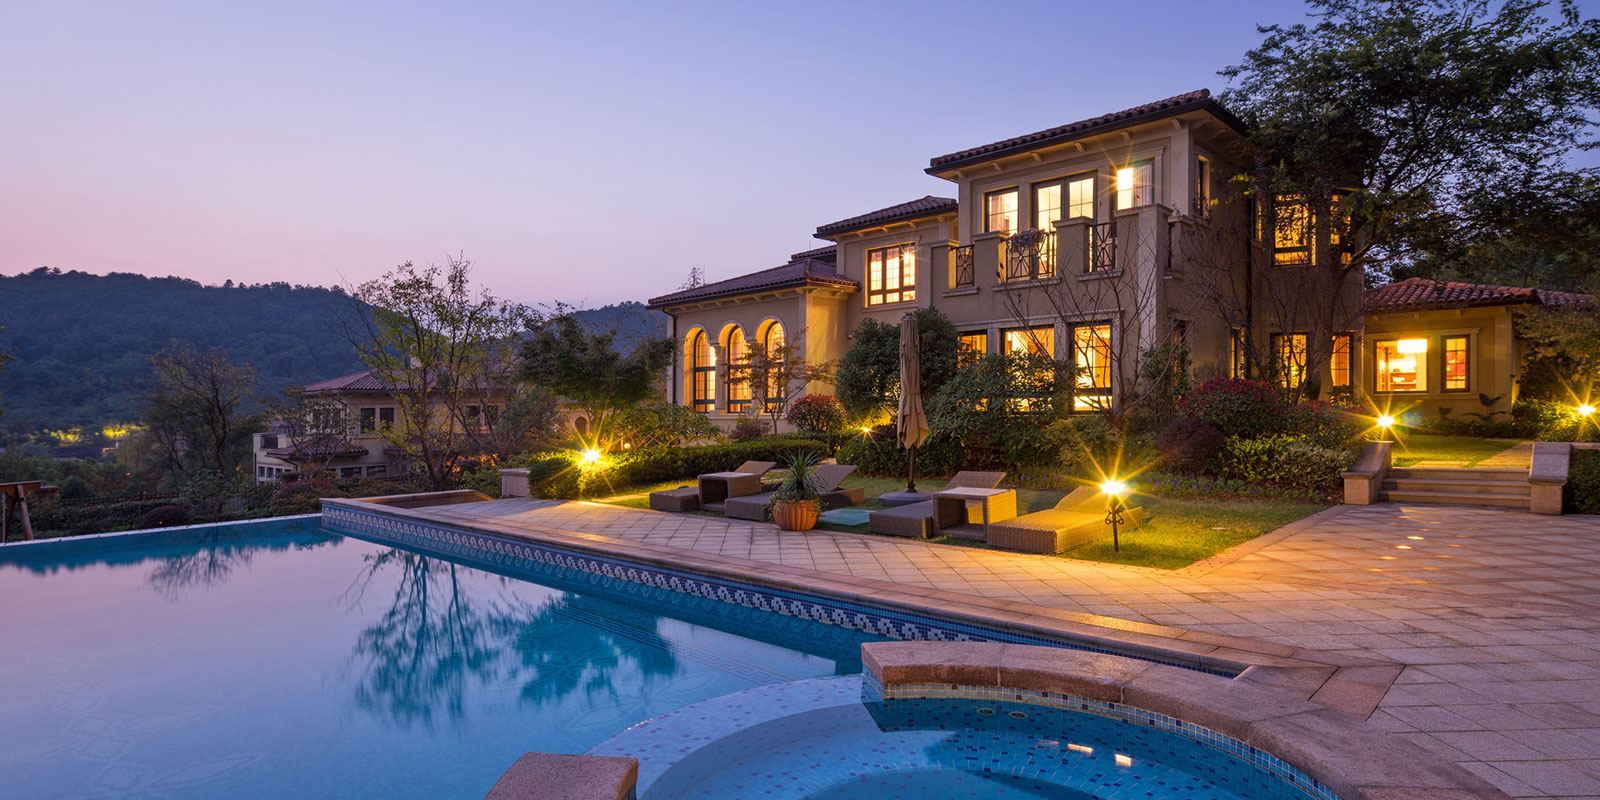 Spanish Style Mansion with Infinity Pool in Dusk